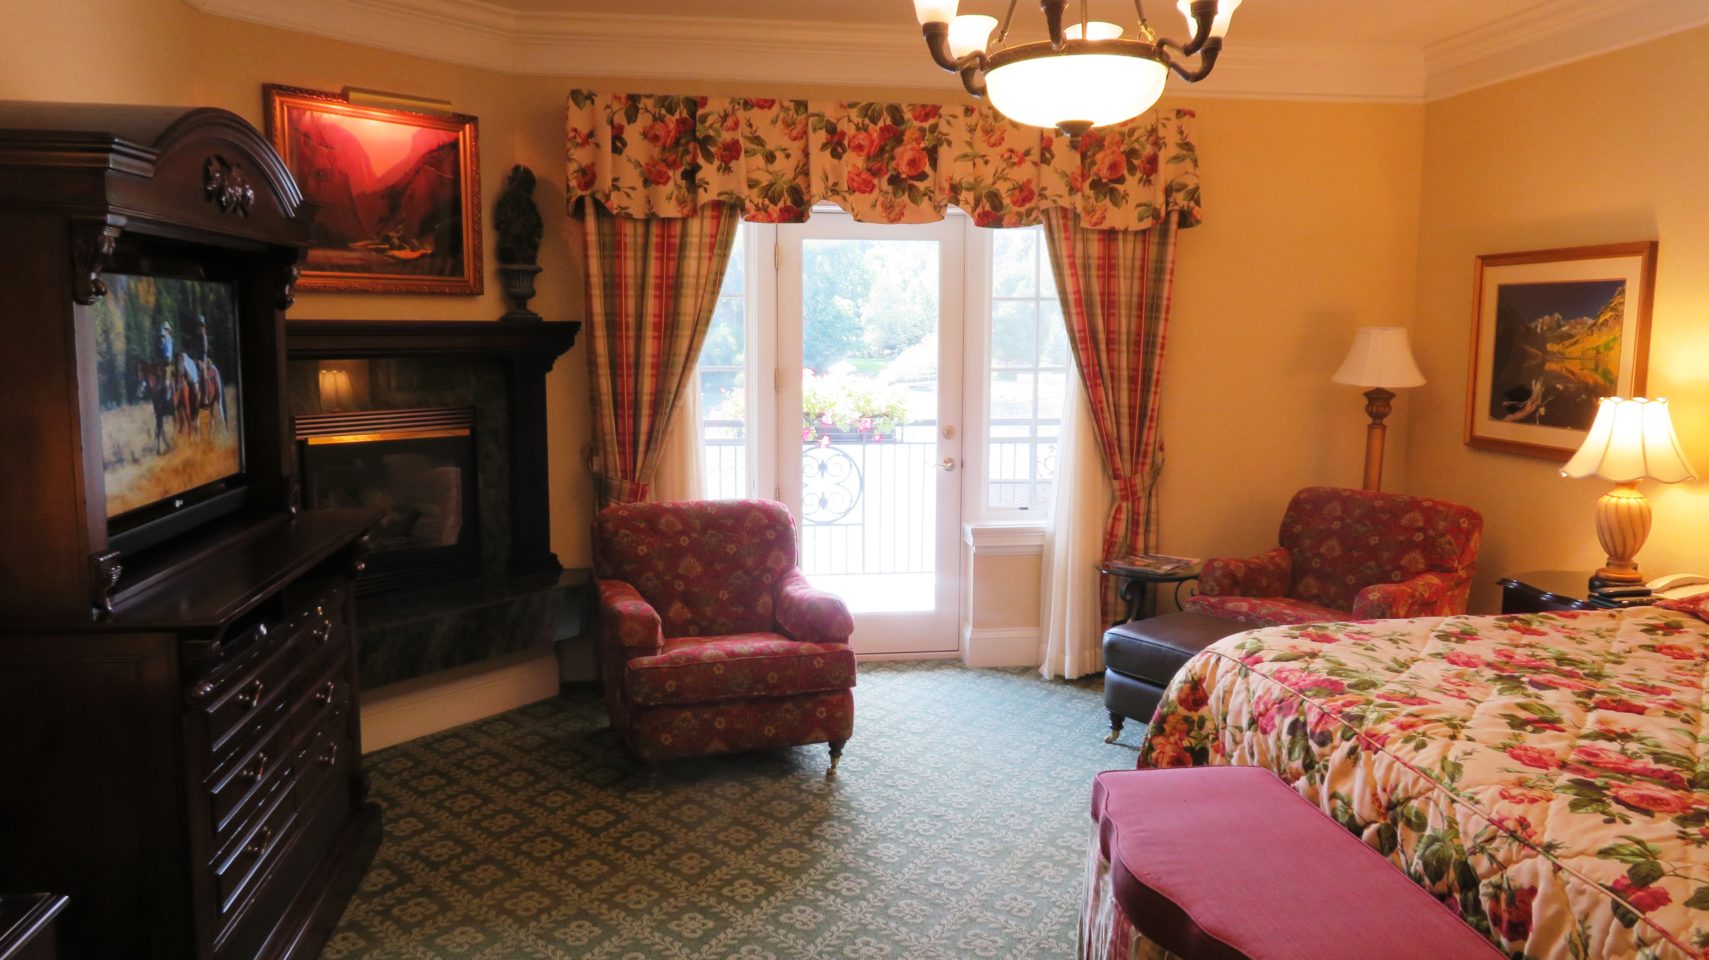 The main room of our Lakeside Suite at The Broadmoor